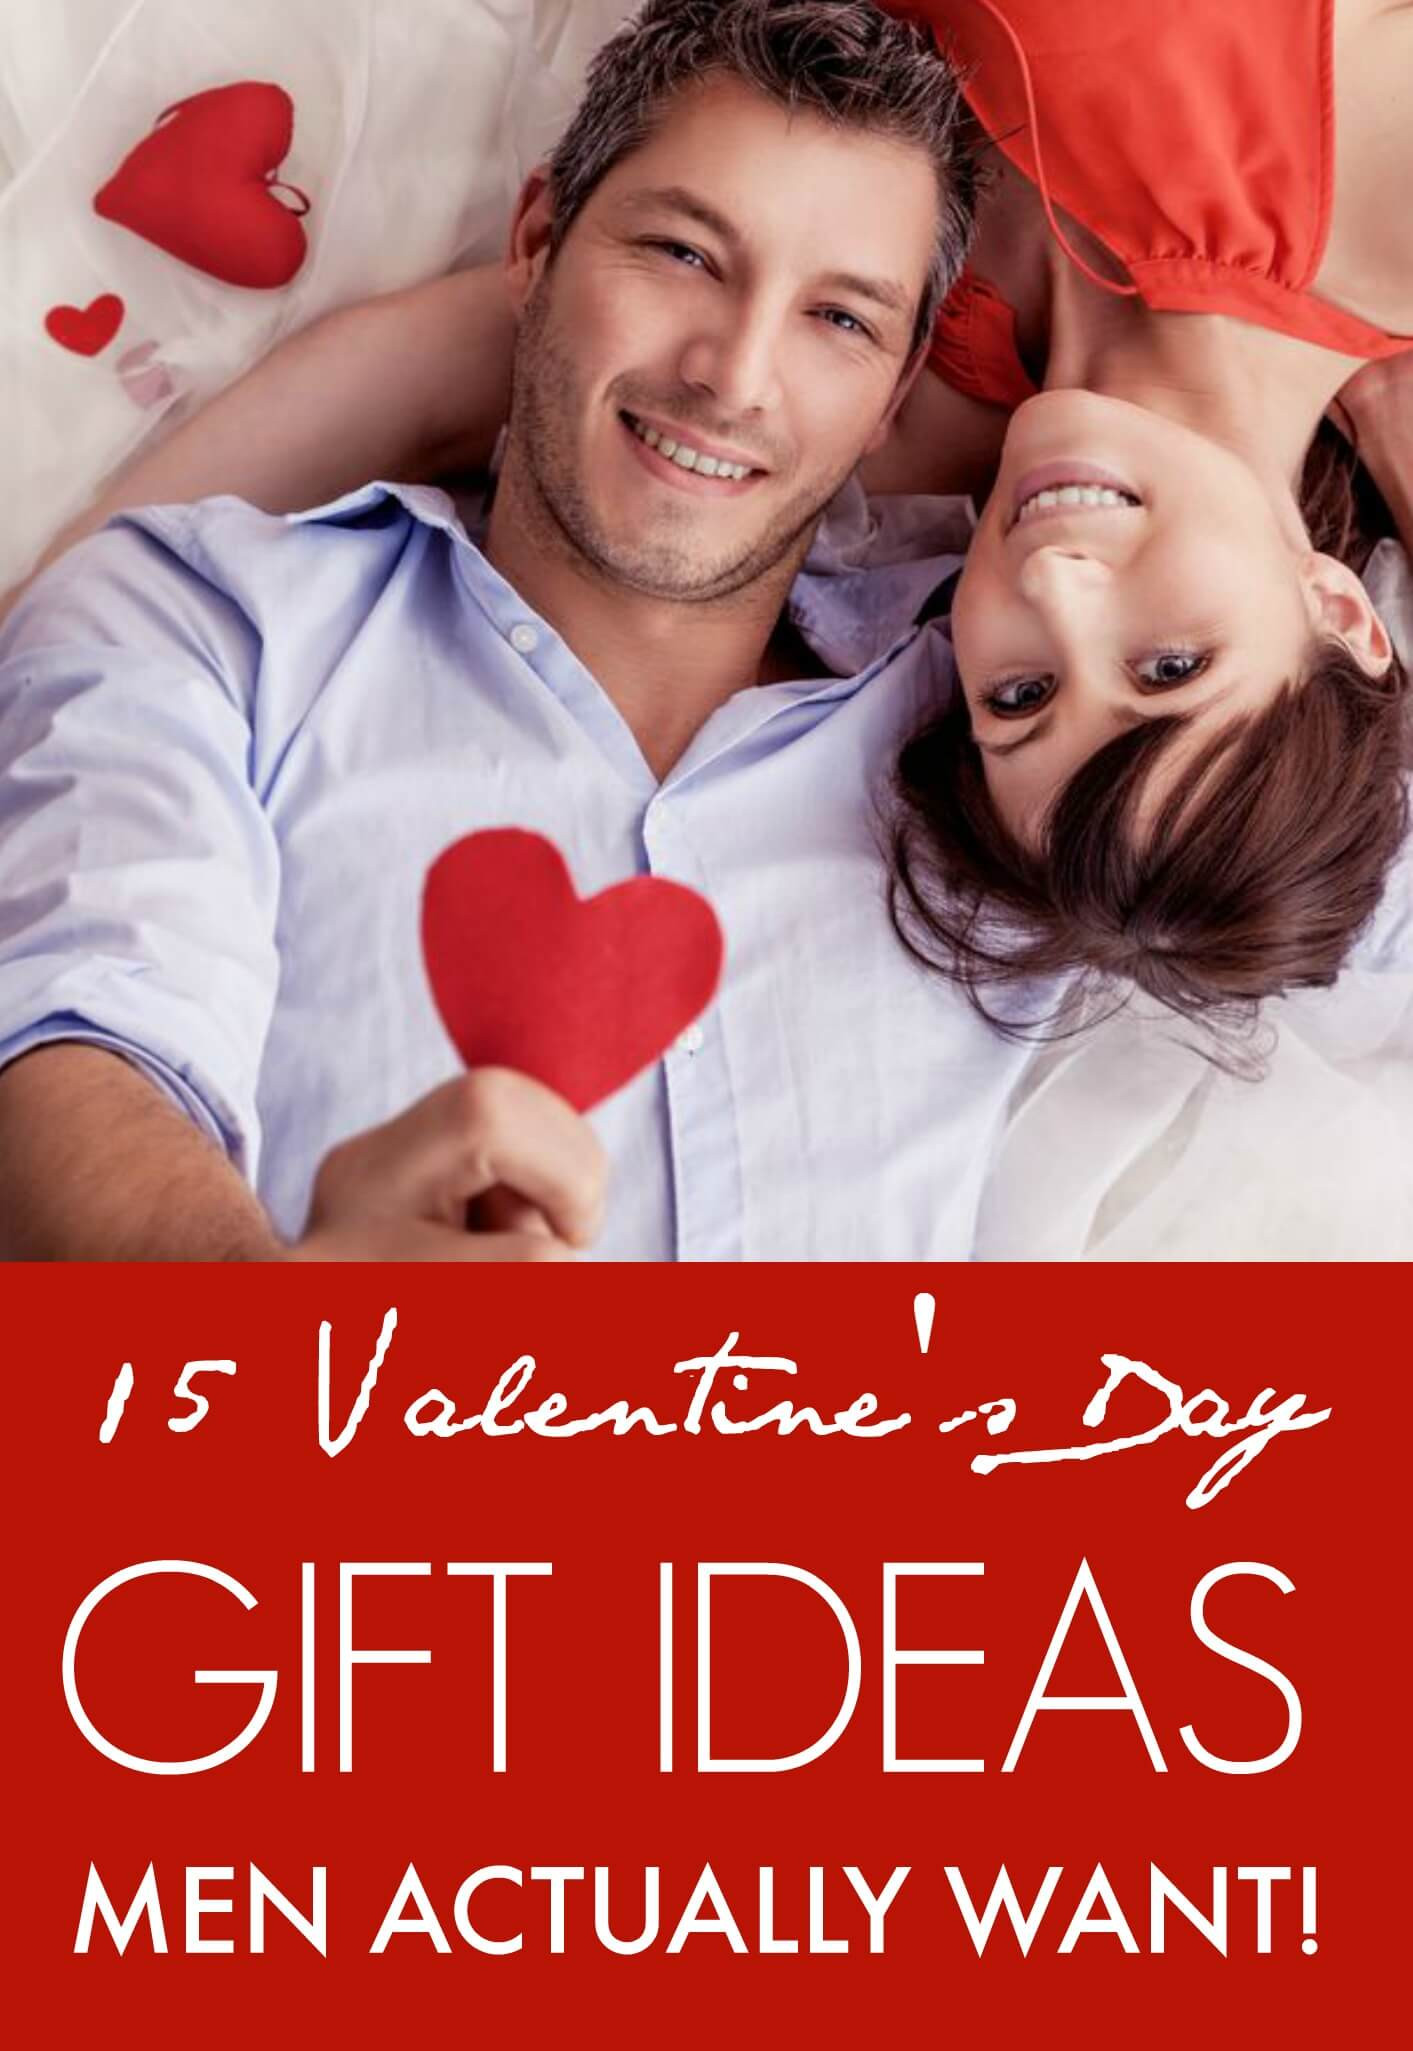 Best Guy Valentines Day Gift Ideas
 15 Valentine’s Day Gift ideas Men Actually Want